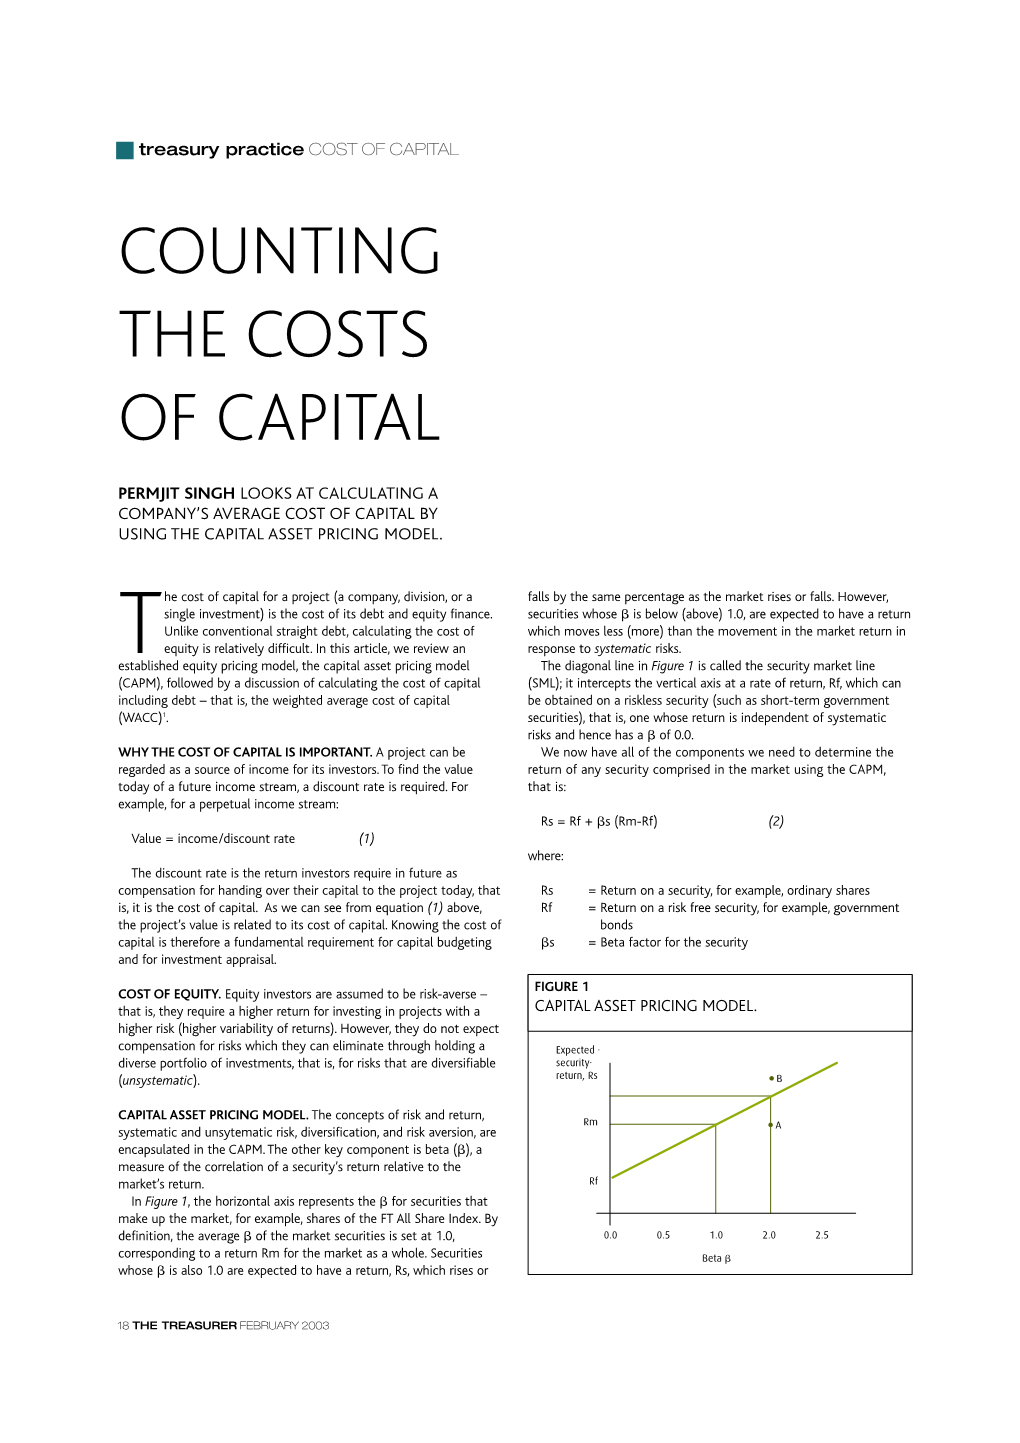 Counting the Costs of Capital